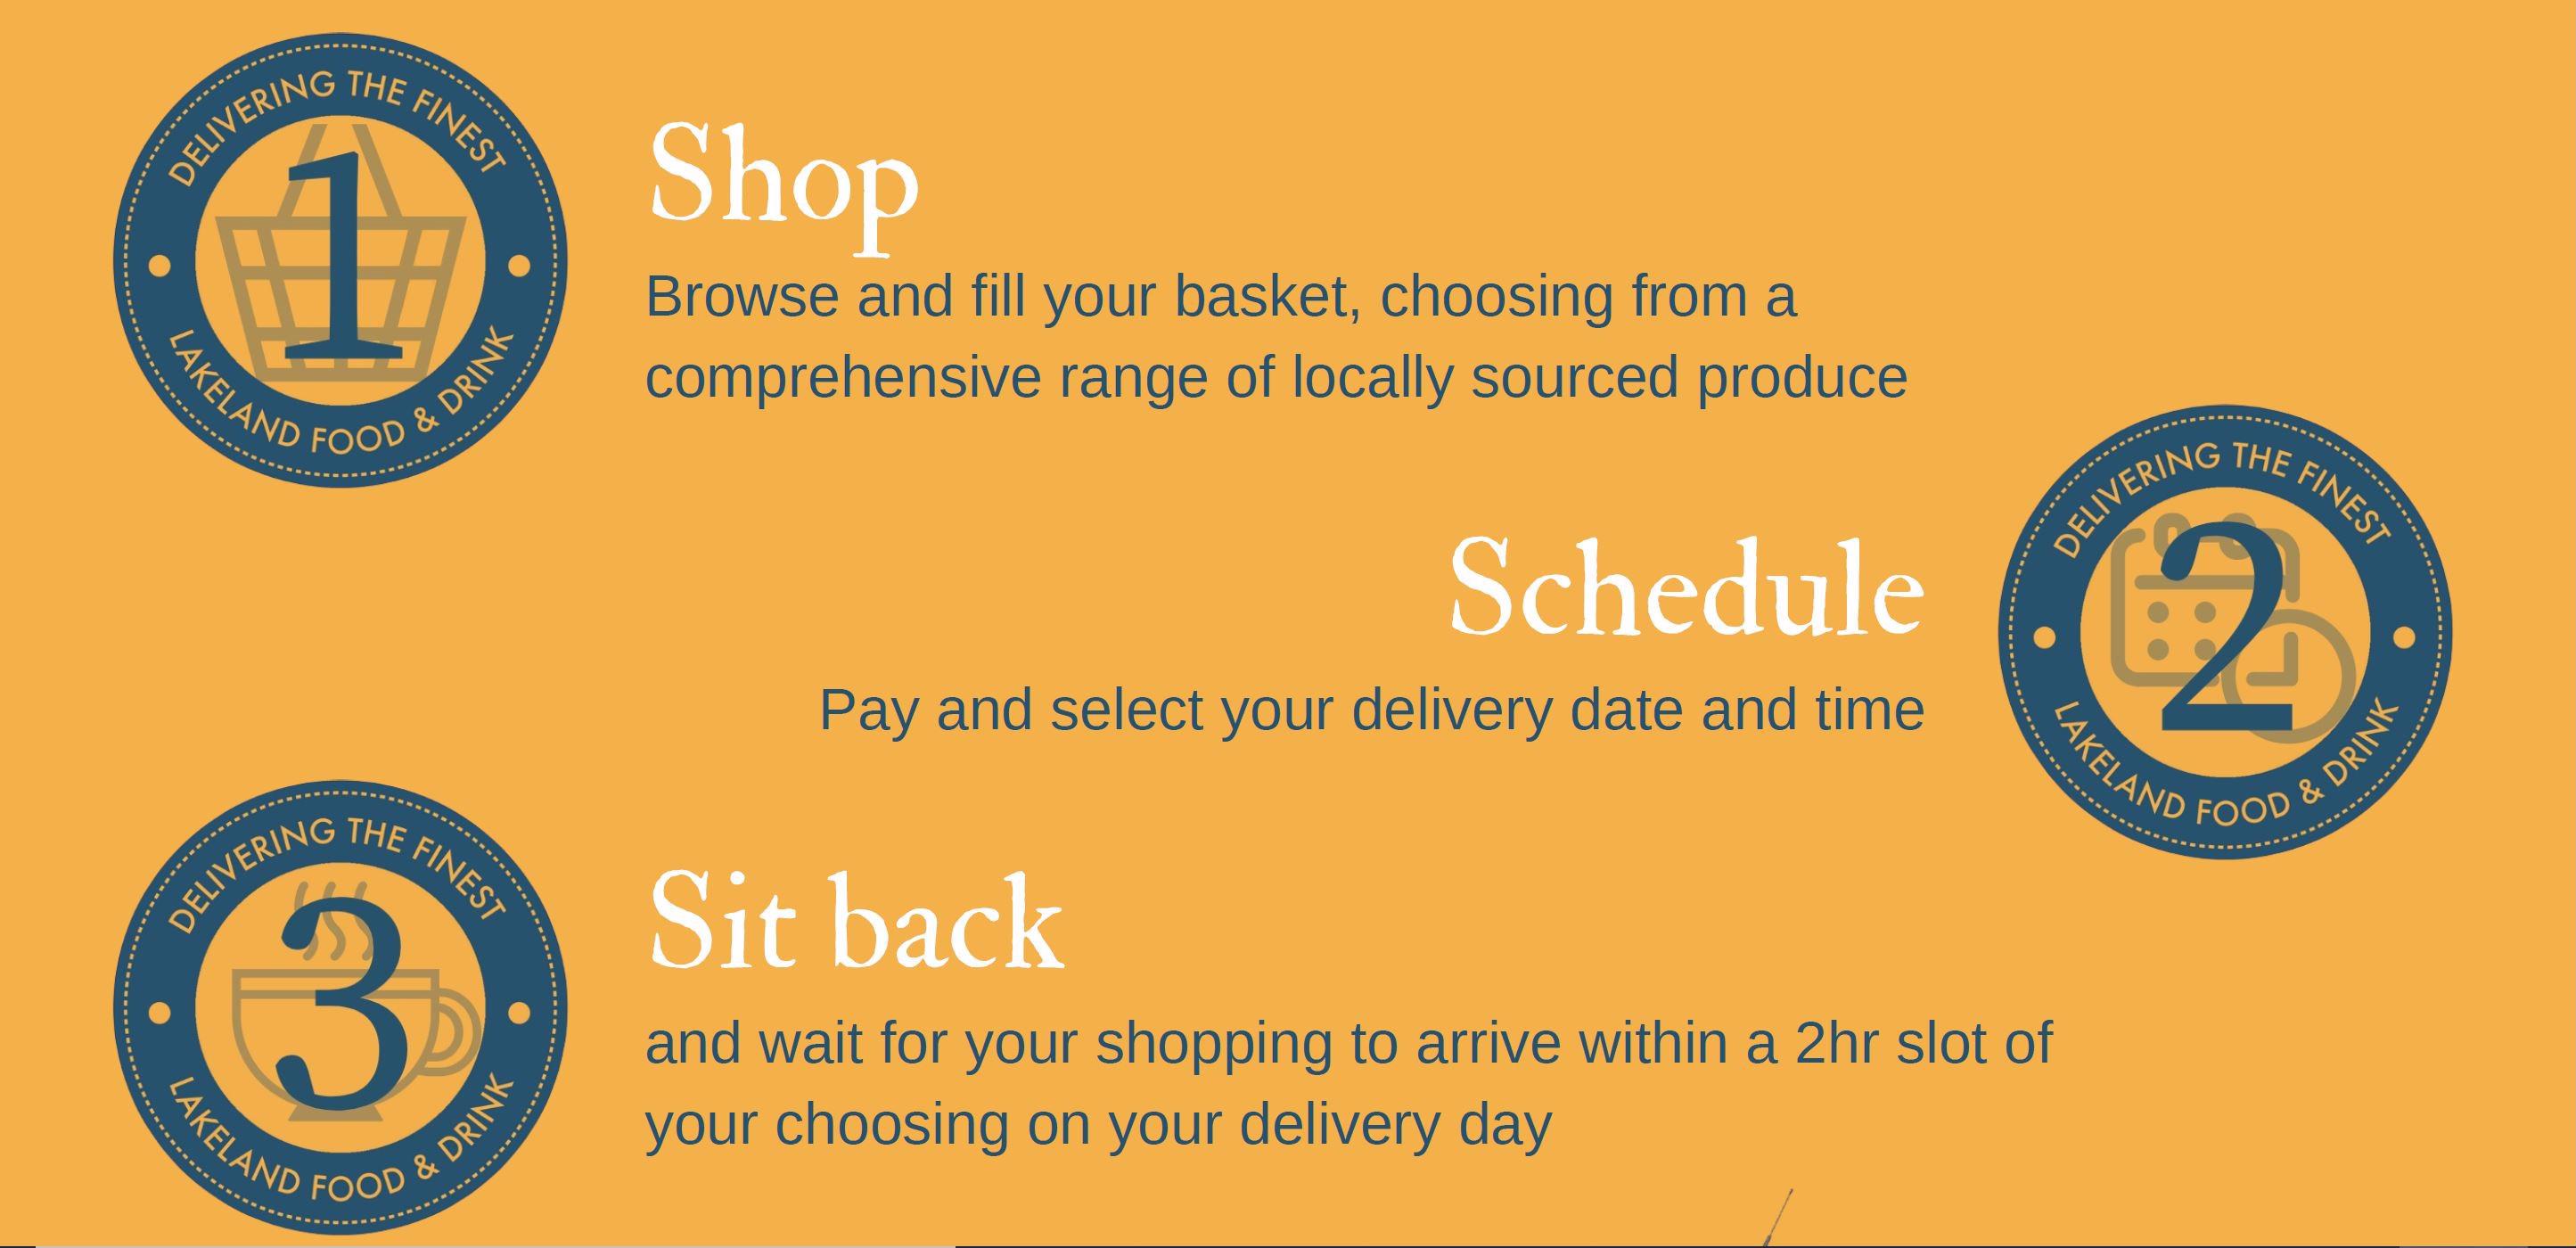 A Day''s Walk - unique online shop and delivery service 